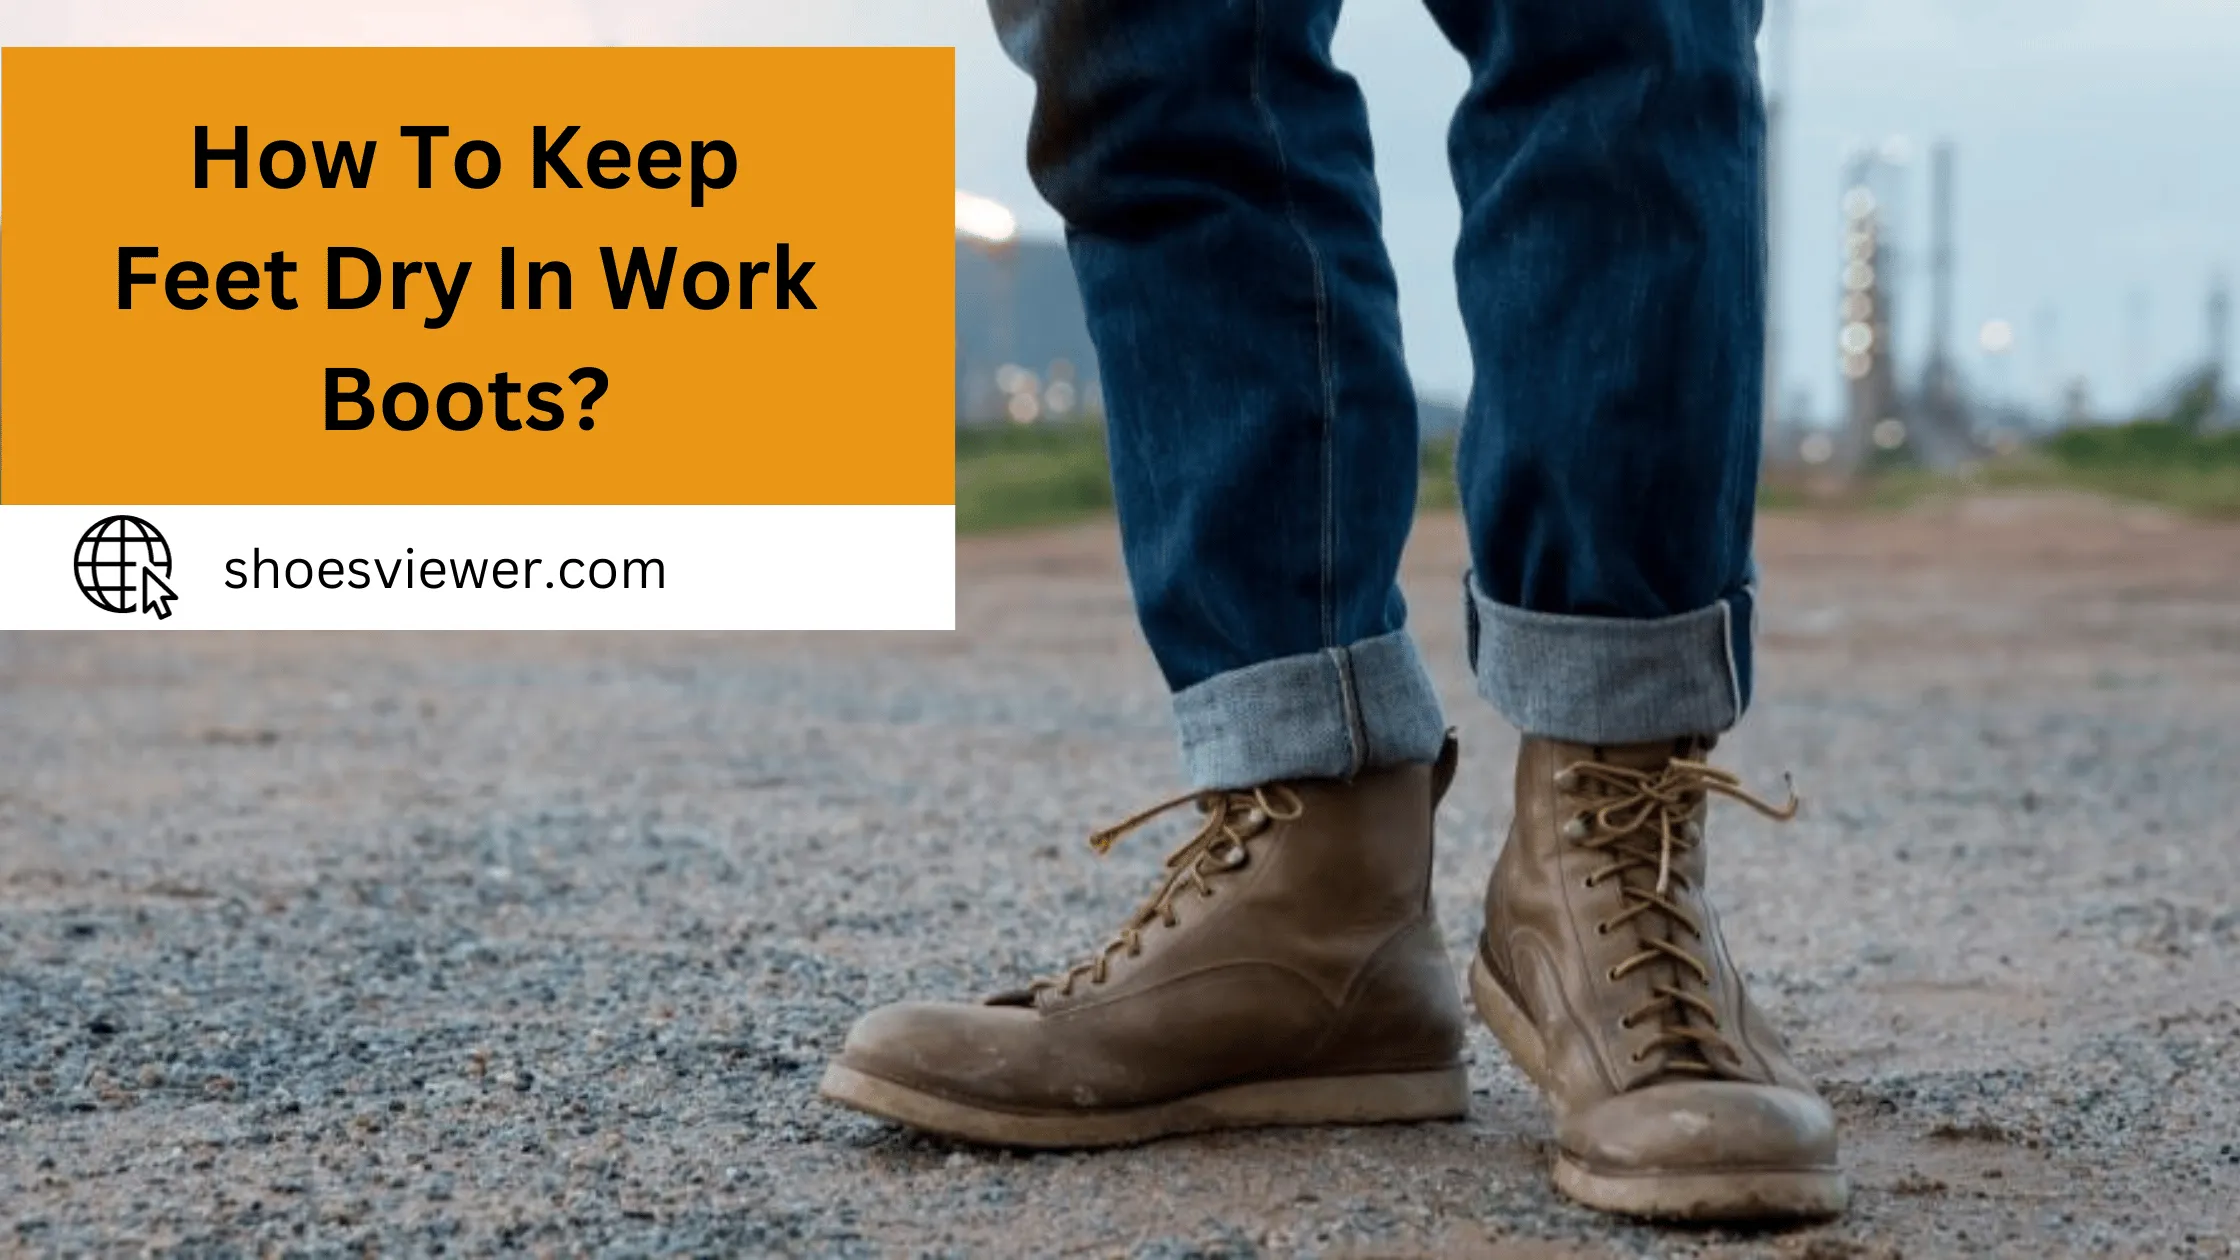 How To Keep Feet Dry In Work Boots? (An In-Depth Guide)